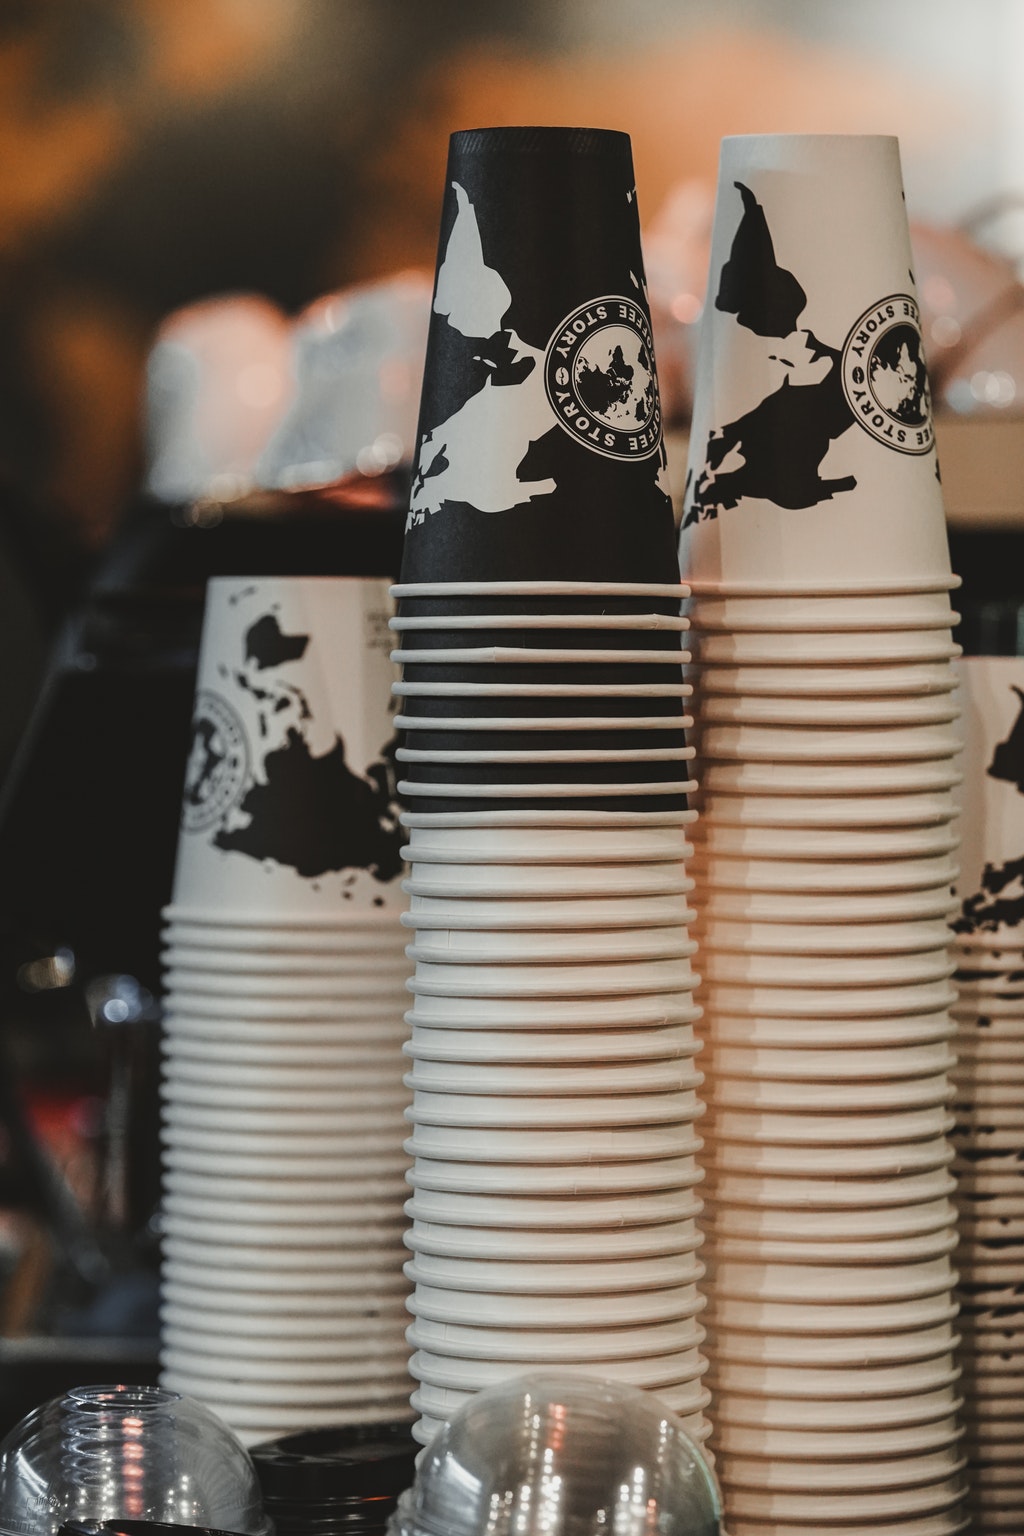 San Francisco Cafes are Banishing Disposable Cups